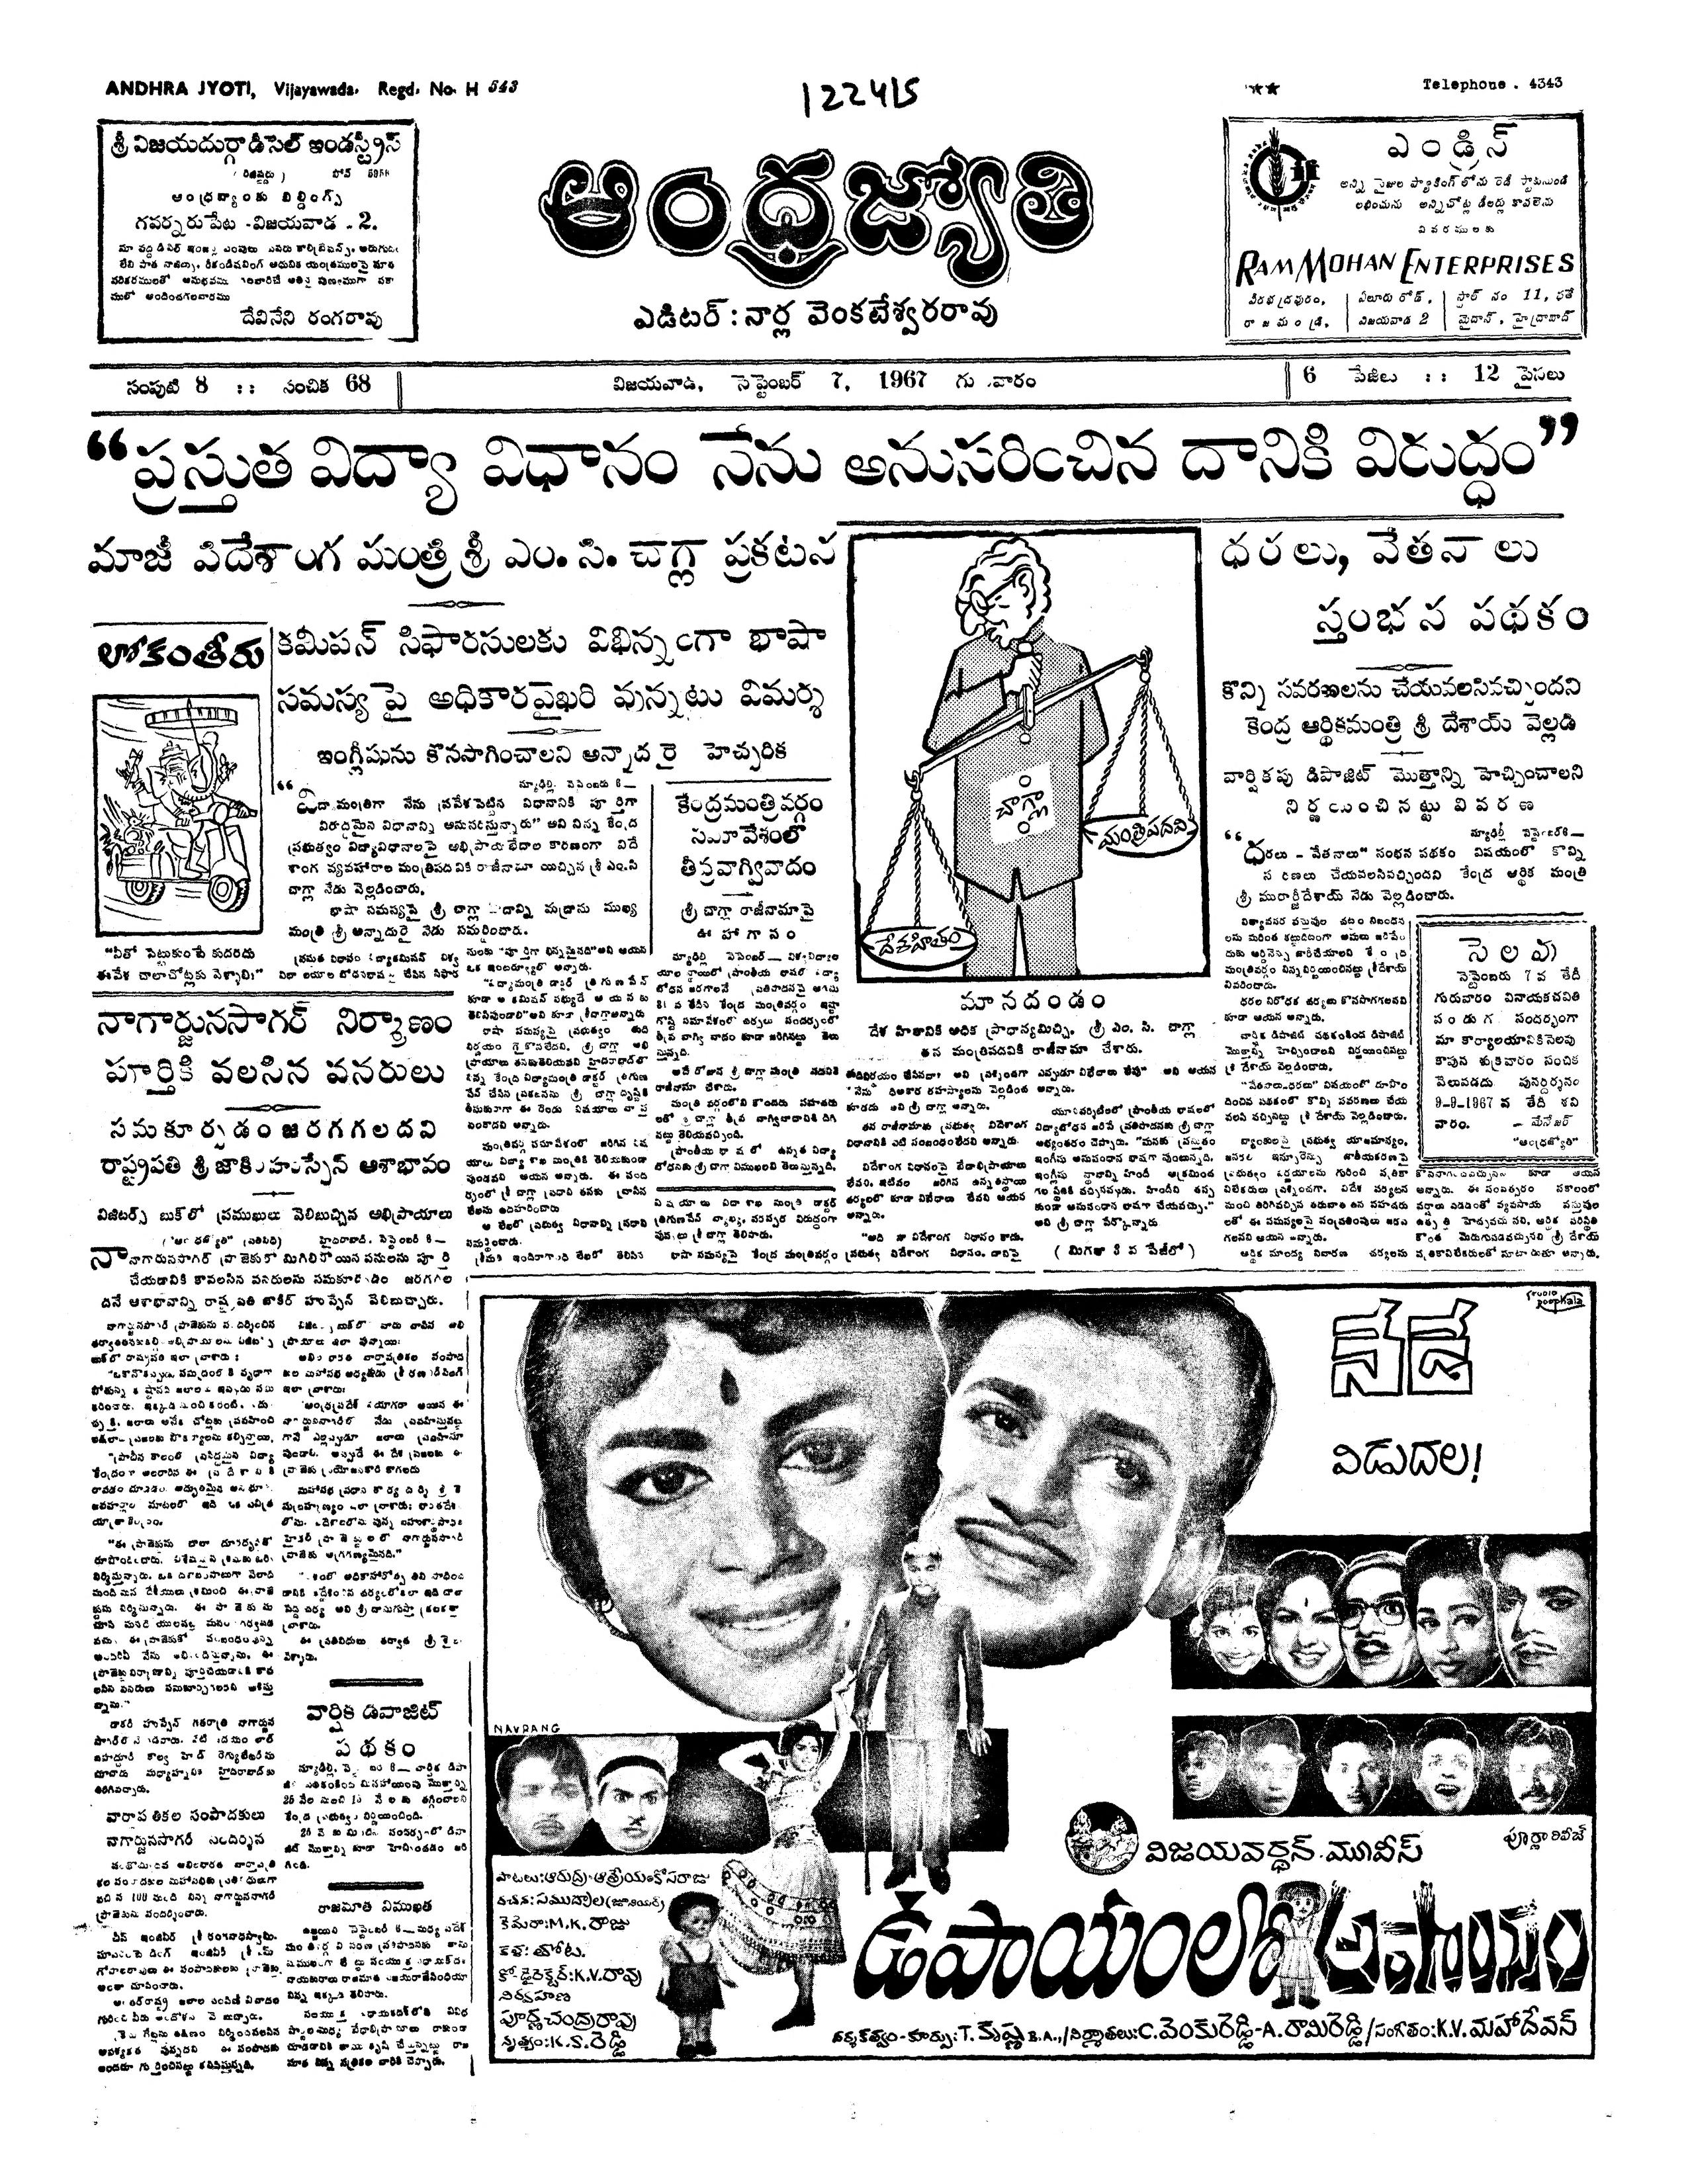 ANDHRAJYOTHI Volume no 8 issue no 68 : AndhraJyothi : Free Download,  Borrow, and Streaming : Internet Archive